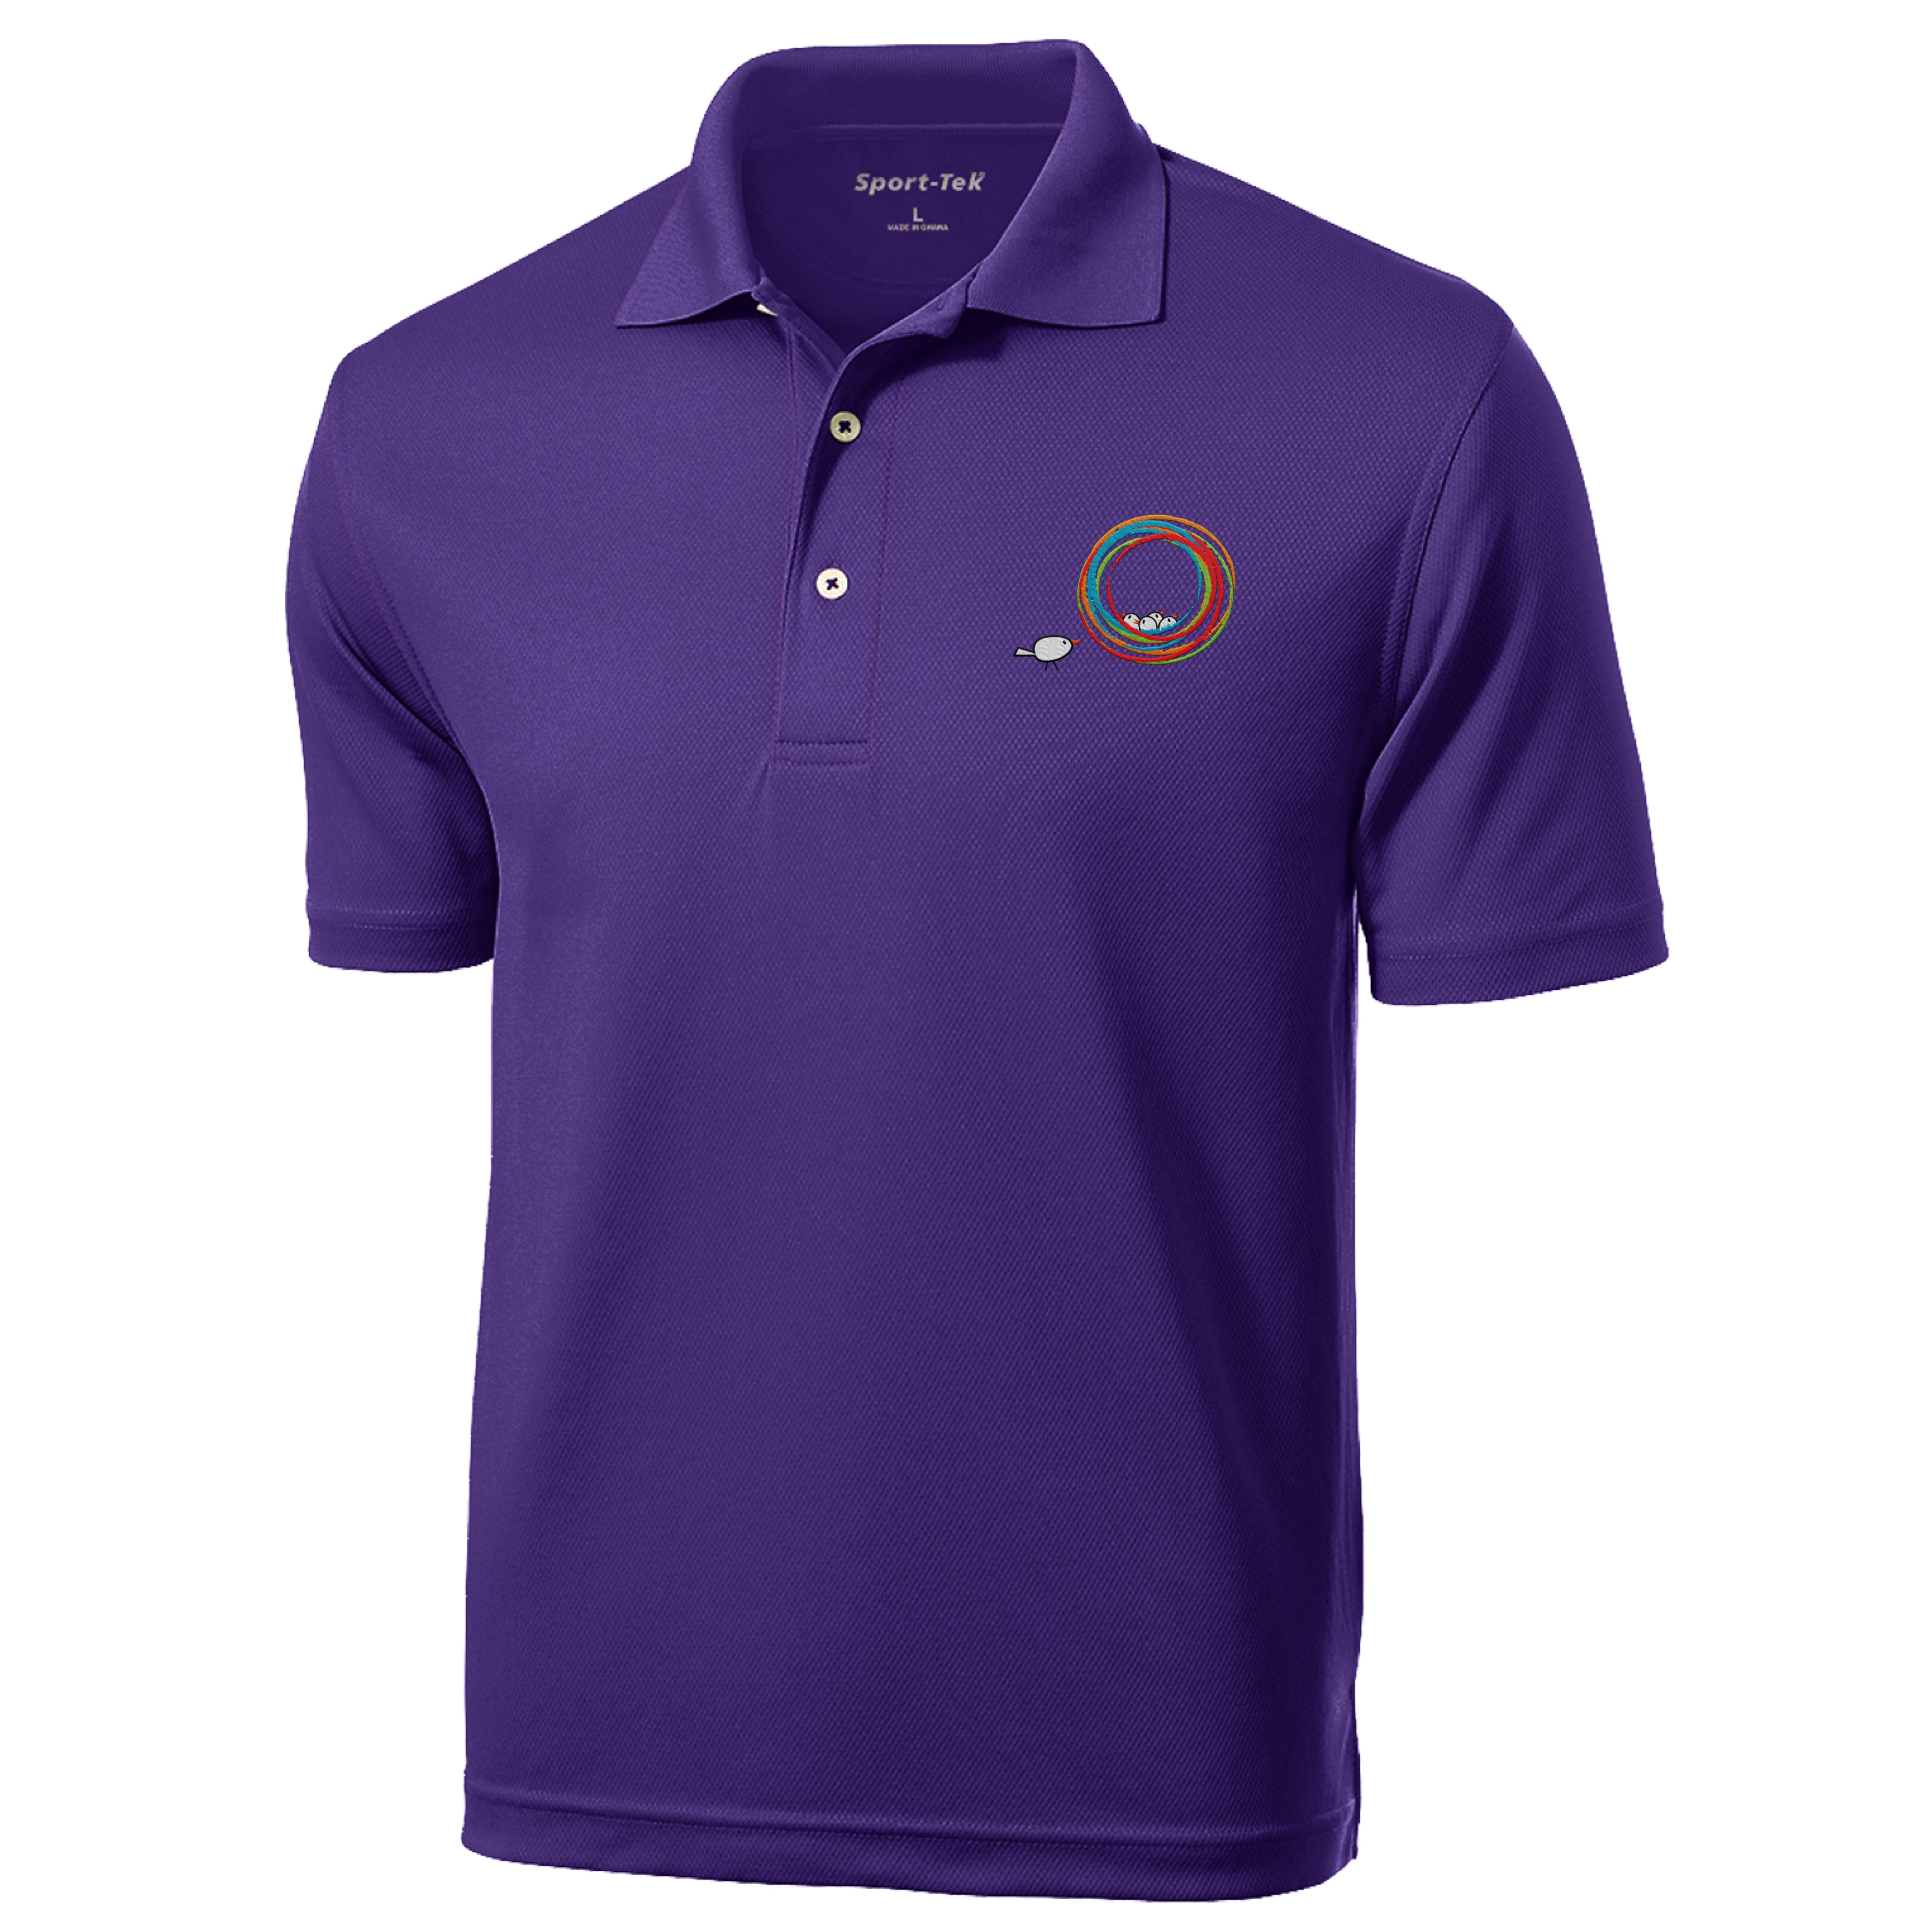 The Learning Nest - Men's Performance Polo